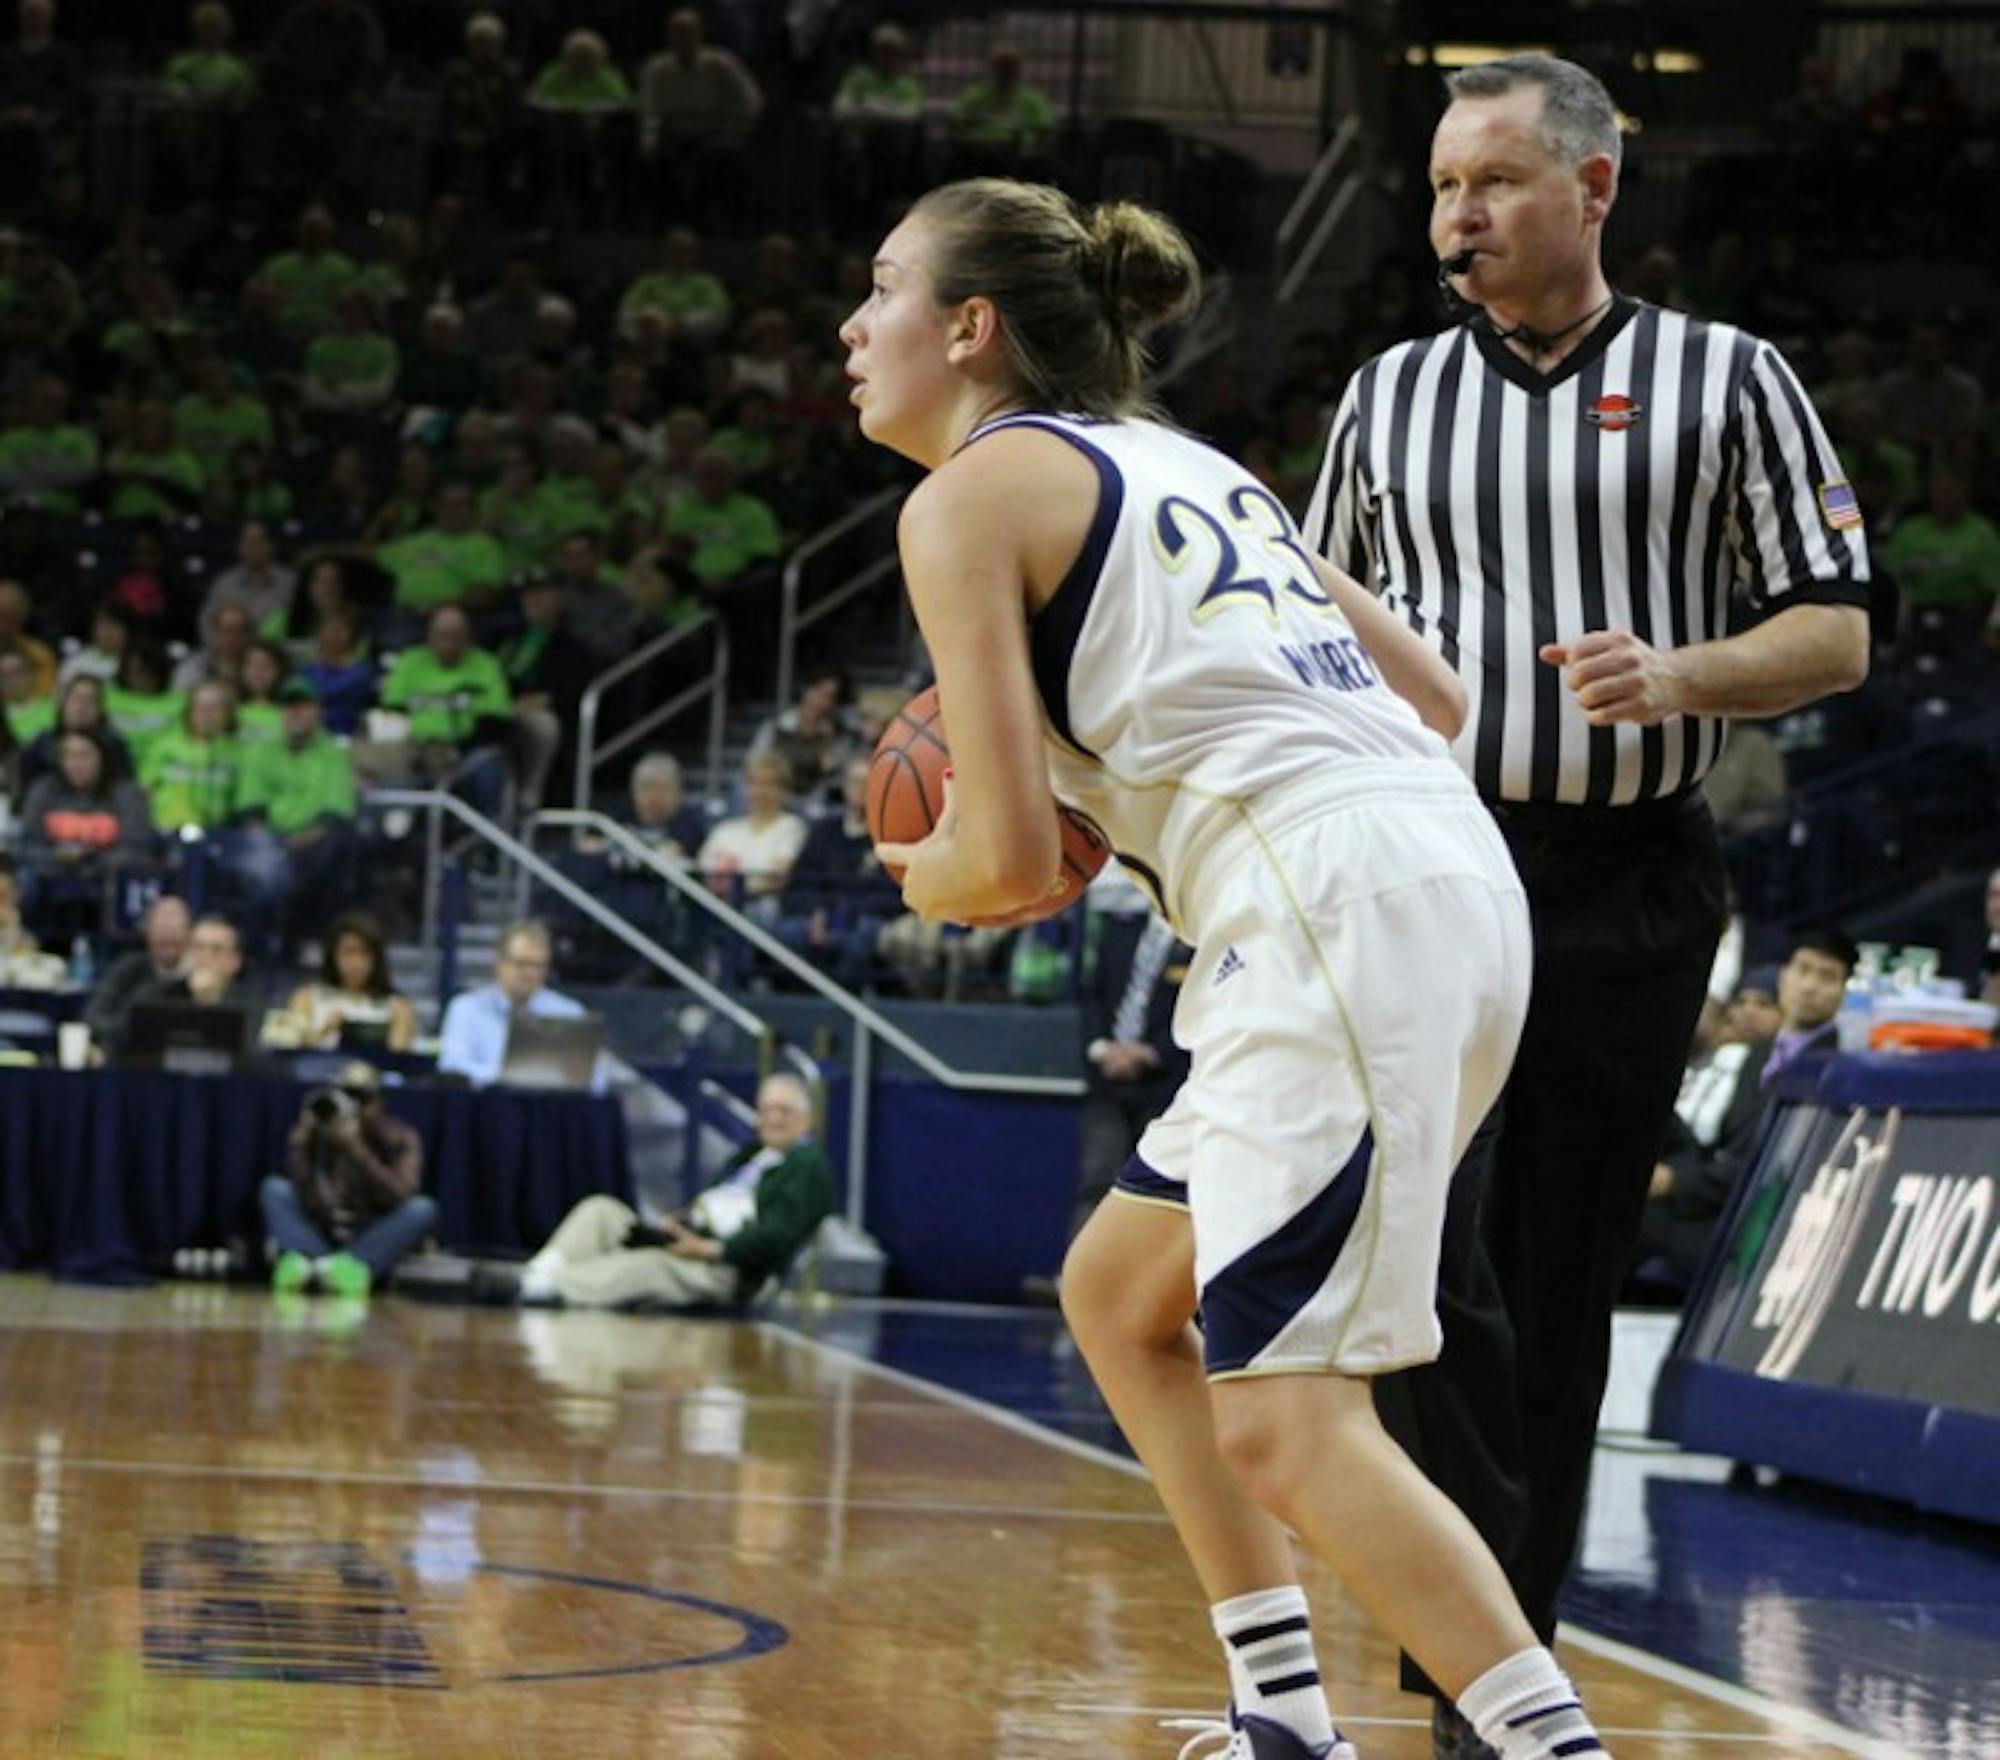 Irish sophomore guard Michaela Mabrey looks to pass during Notre Dame’s 99-50 victory over UNC Wilmington on Nov. 9, 2013. Mabrey averages 9.4 points a game, good for fourth on the team.